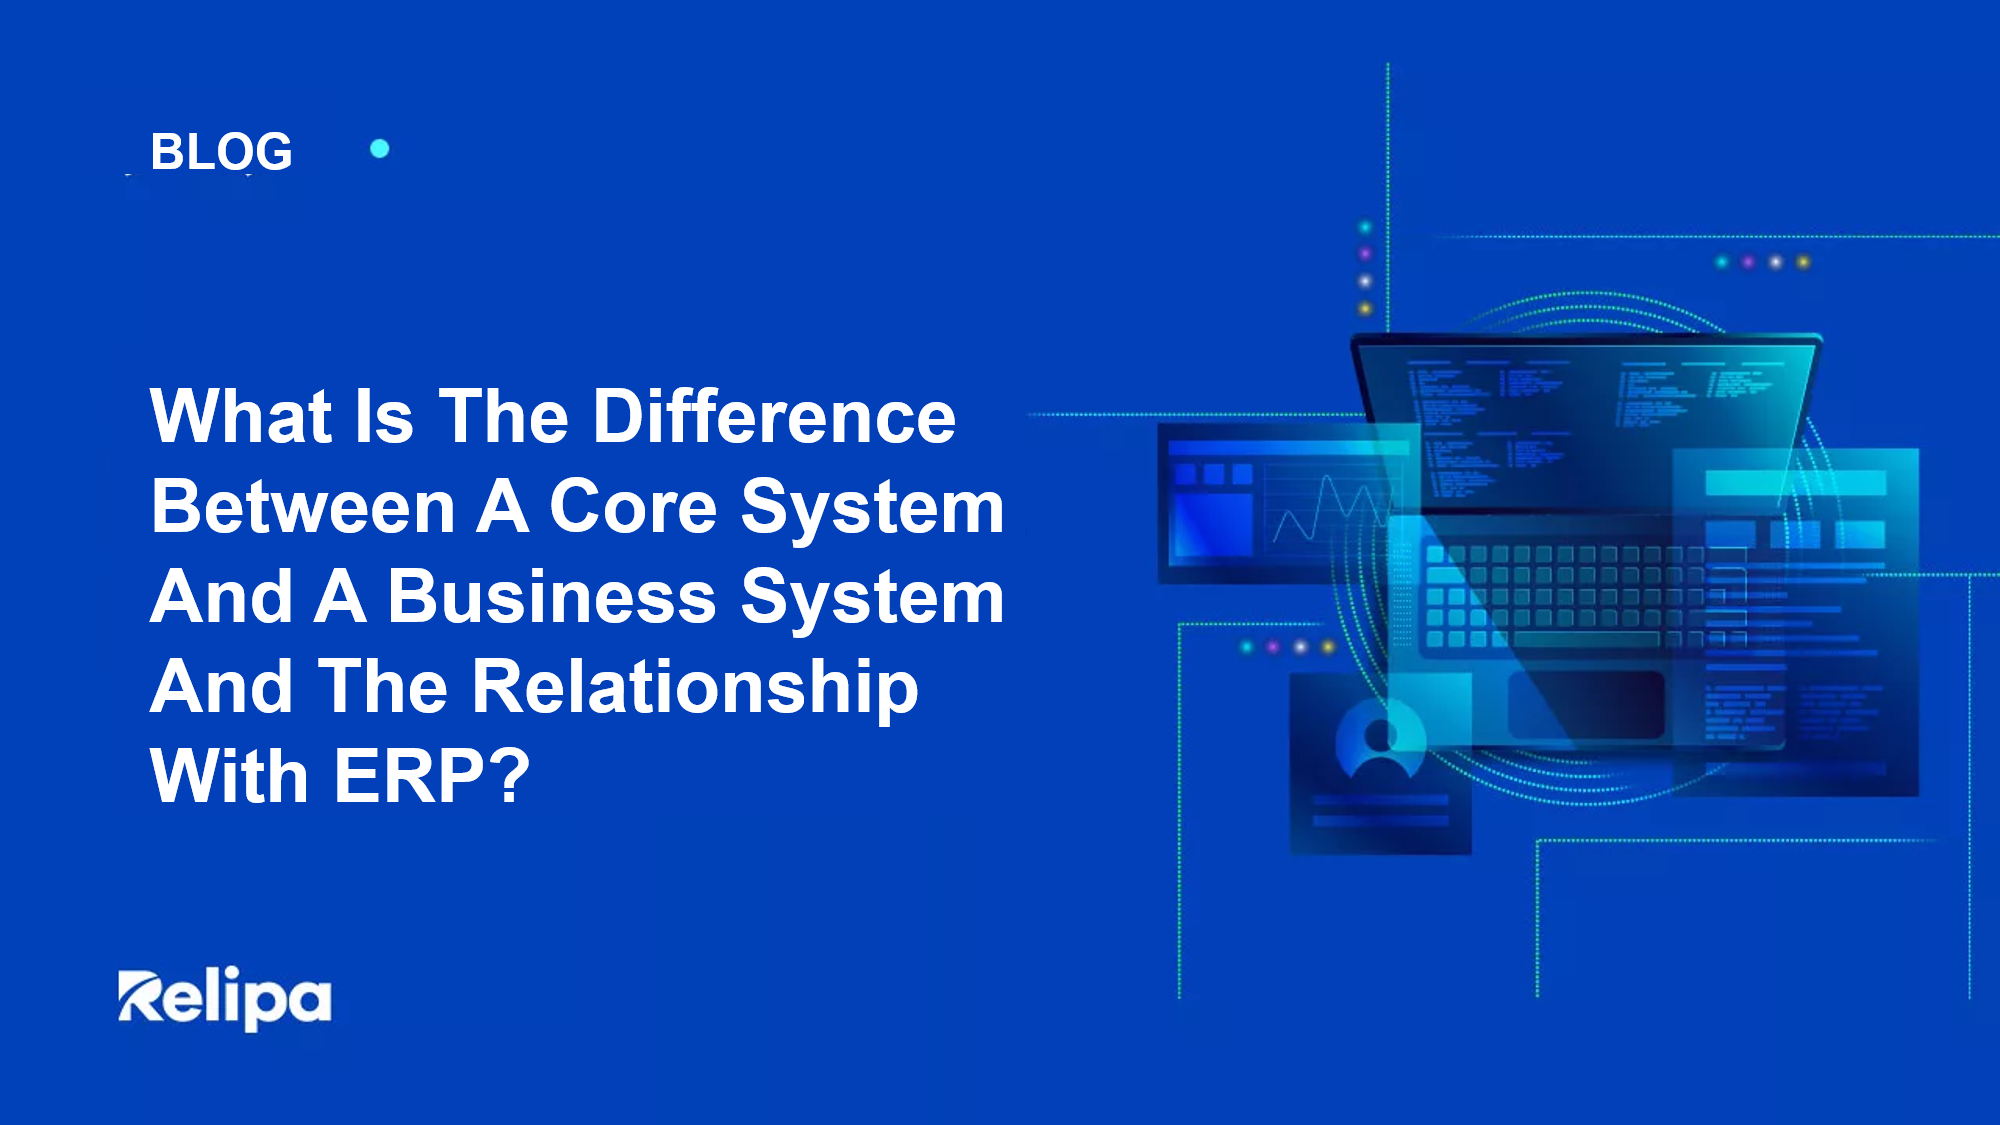 What is the difference between a core system and a business system and the relationship with ERP?